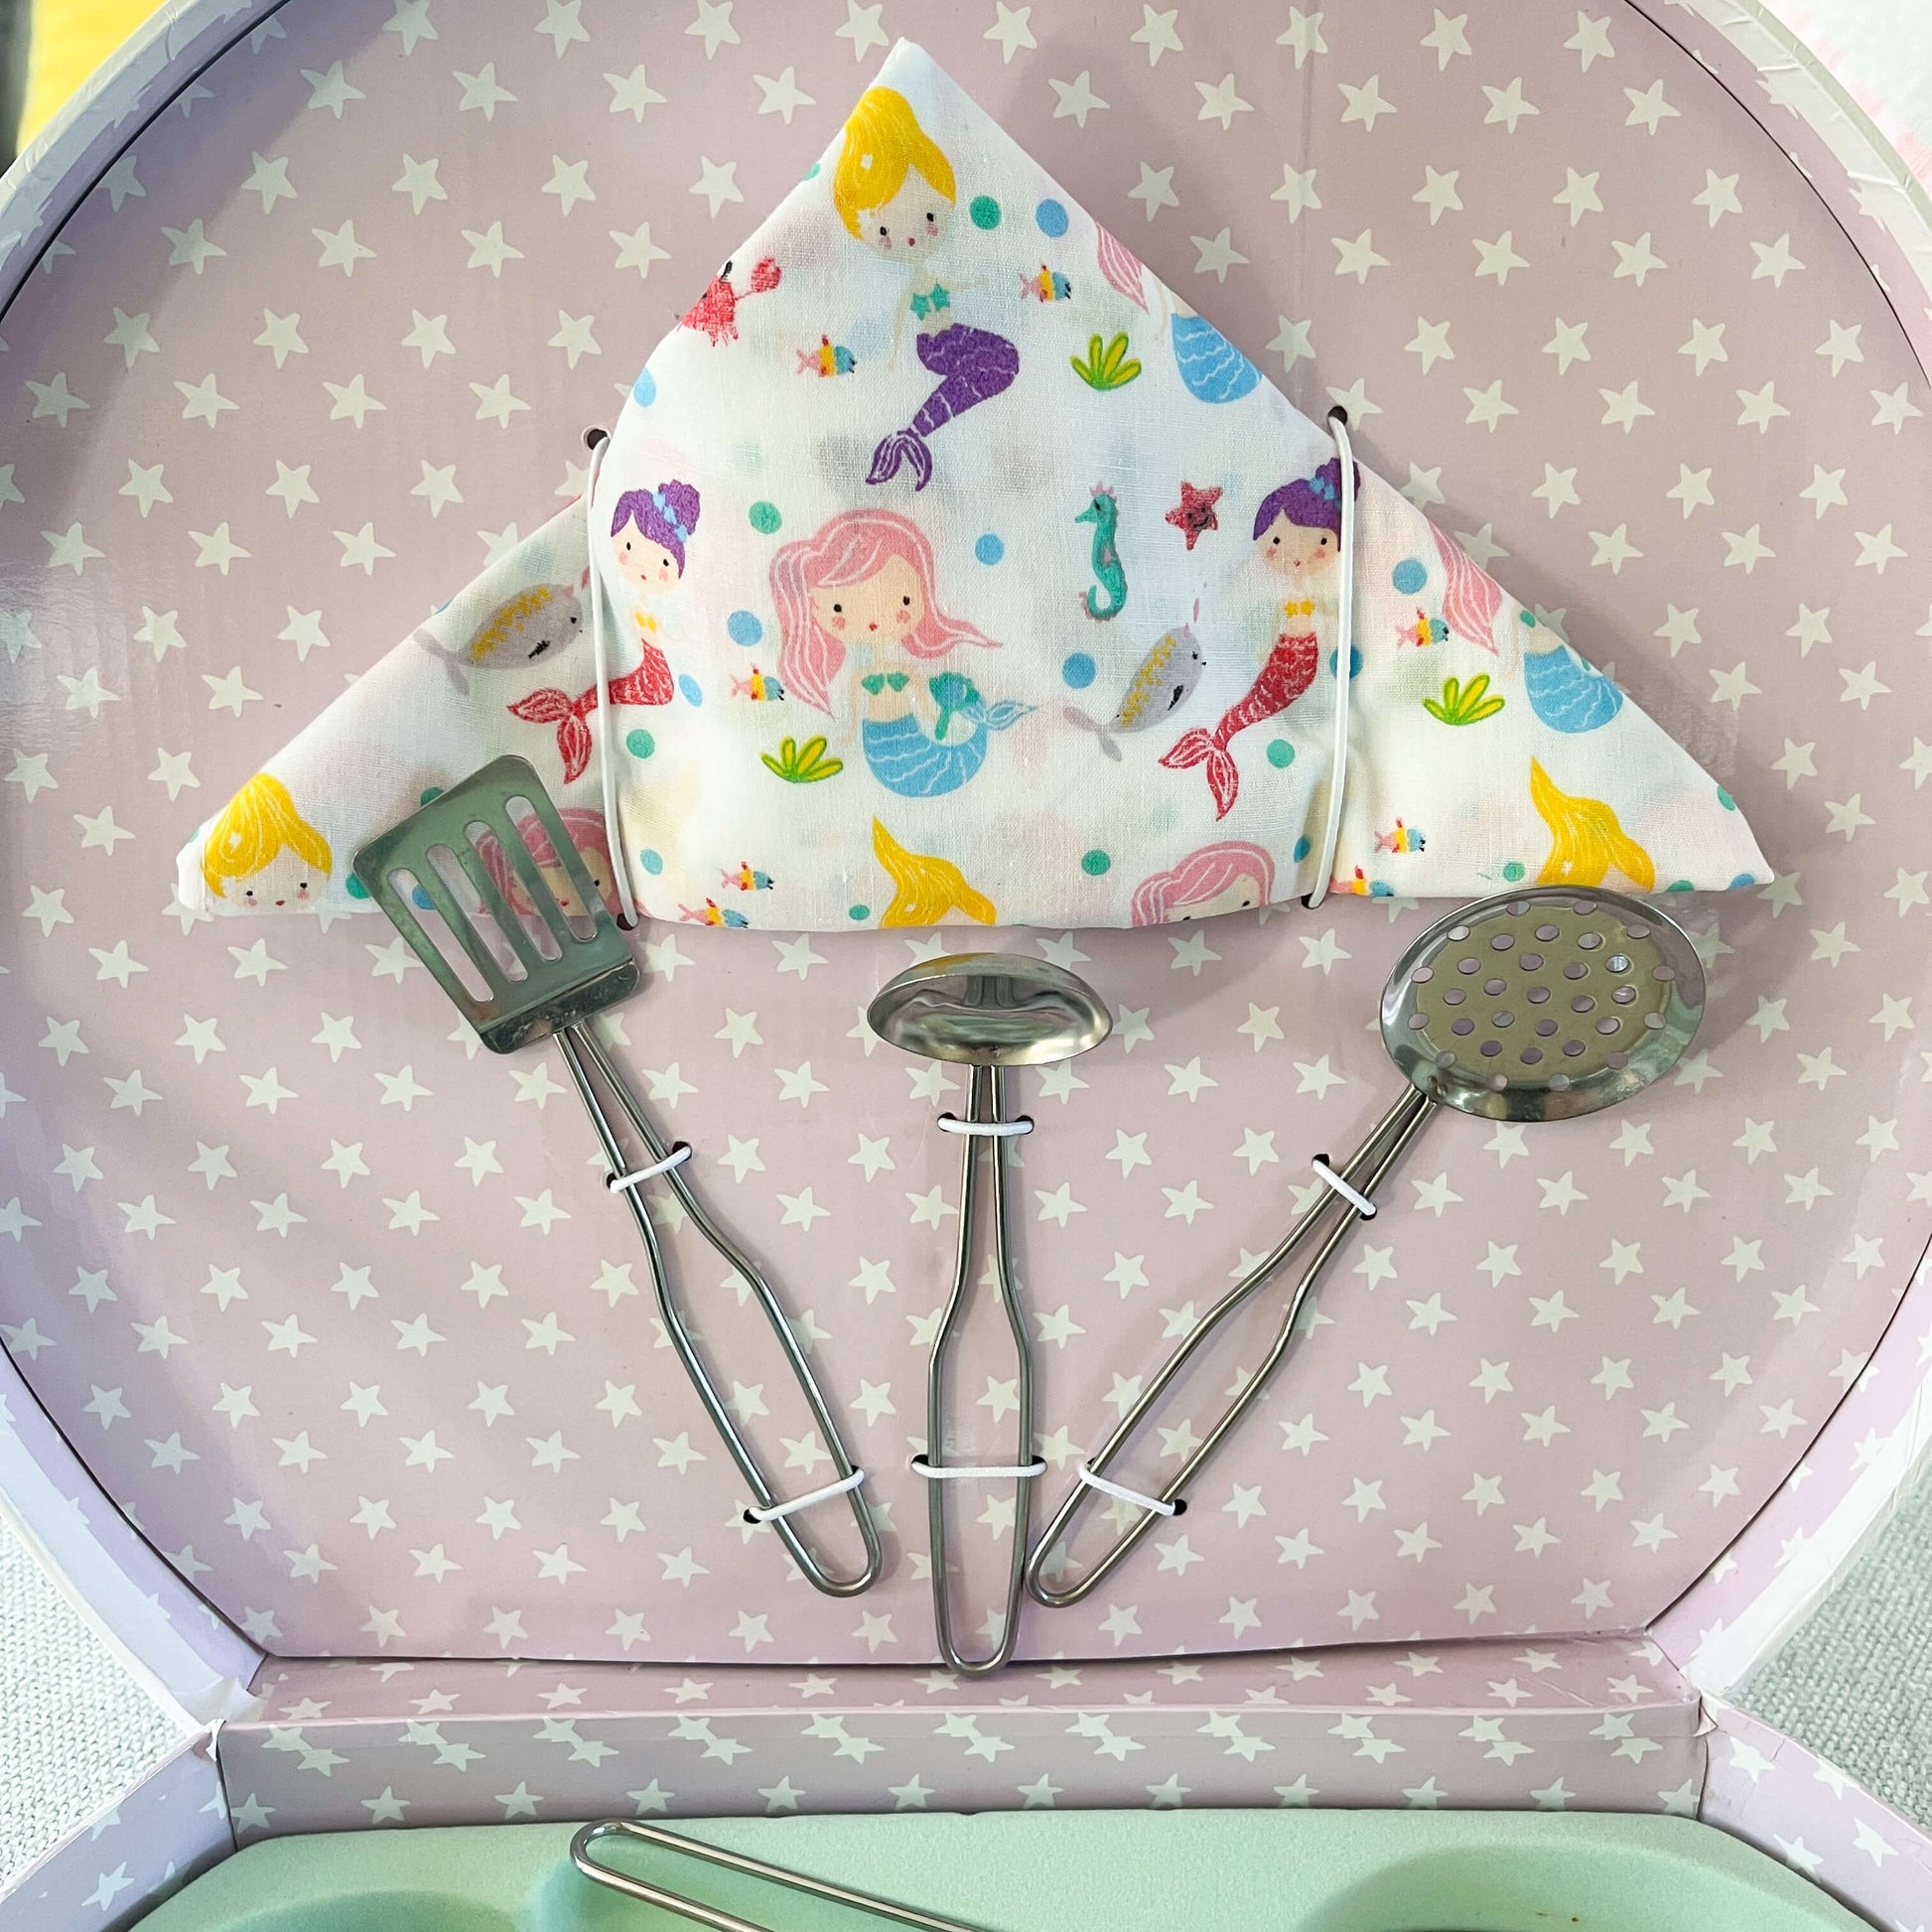 Childrens mermaid themed kitchen set utensils and cloth. 